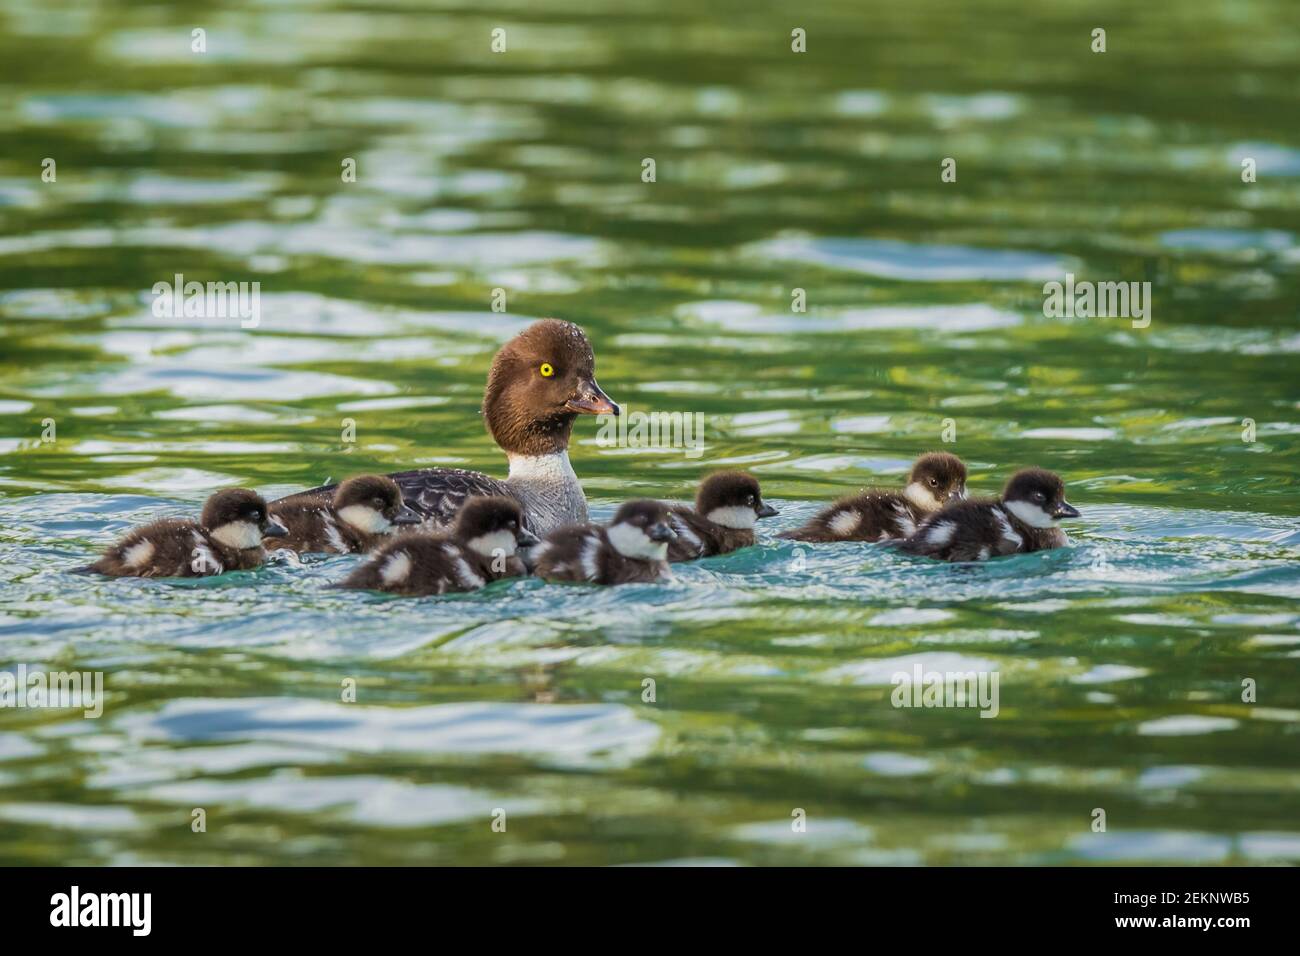 Family of eight Common Goldeneye (Bucephala clangula) ducks in a pond during spring. Seven ducklings swimming close to their mother. Stock Photo